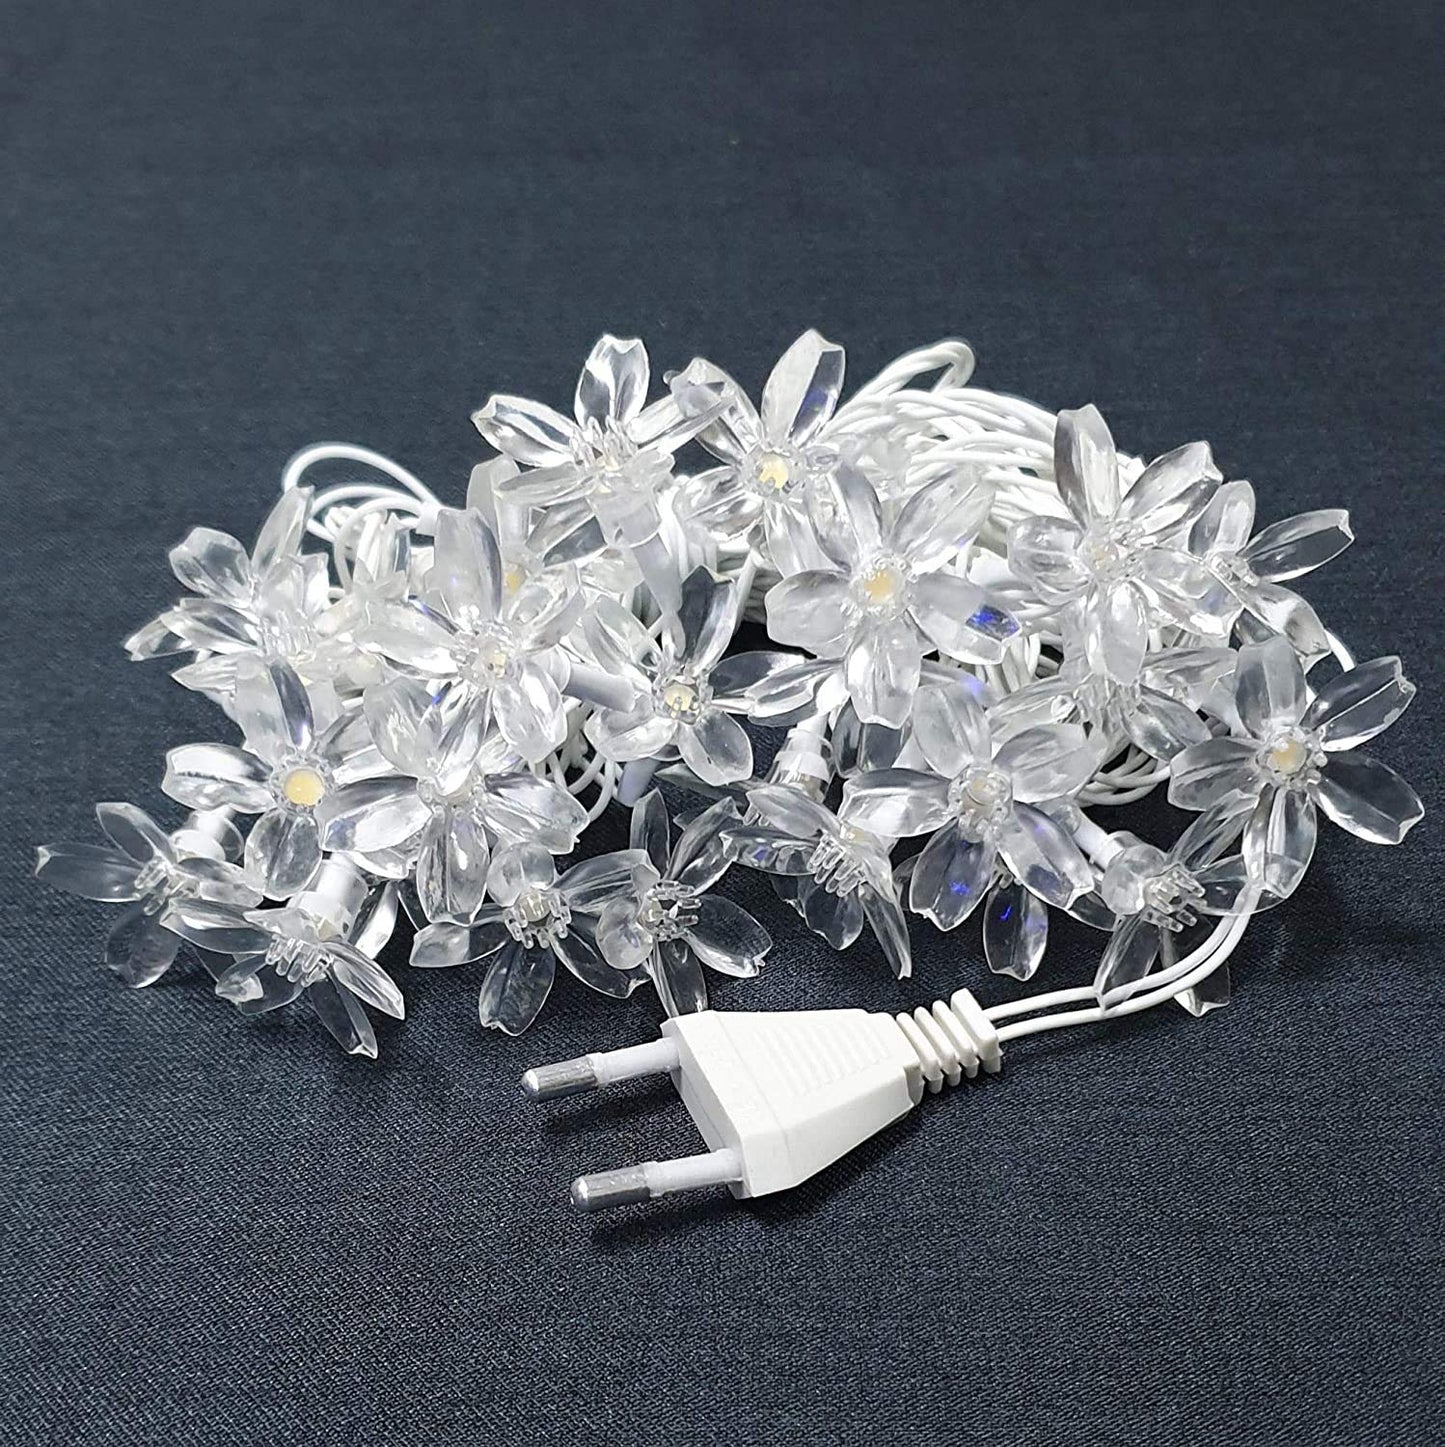 Silicone Blooming Flower Fairy String Lights (Warm White Bulbs) - Homely Arts